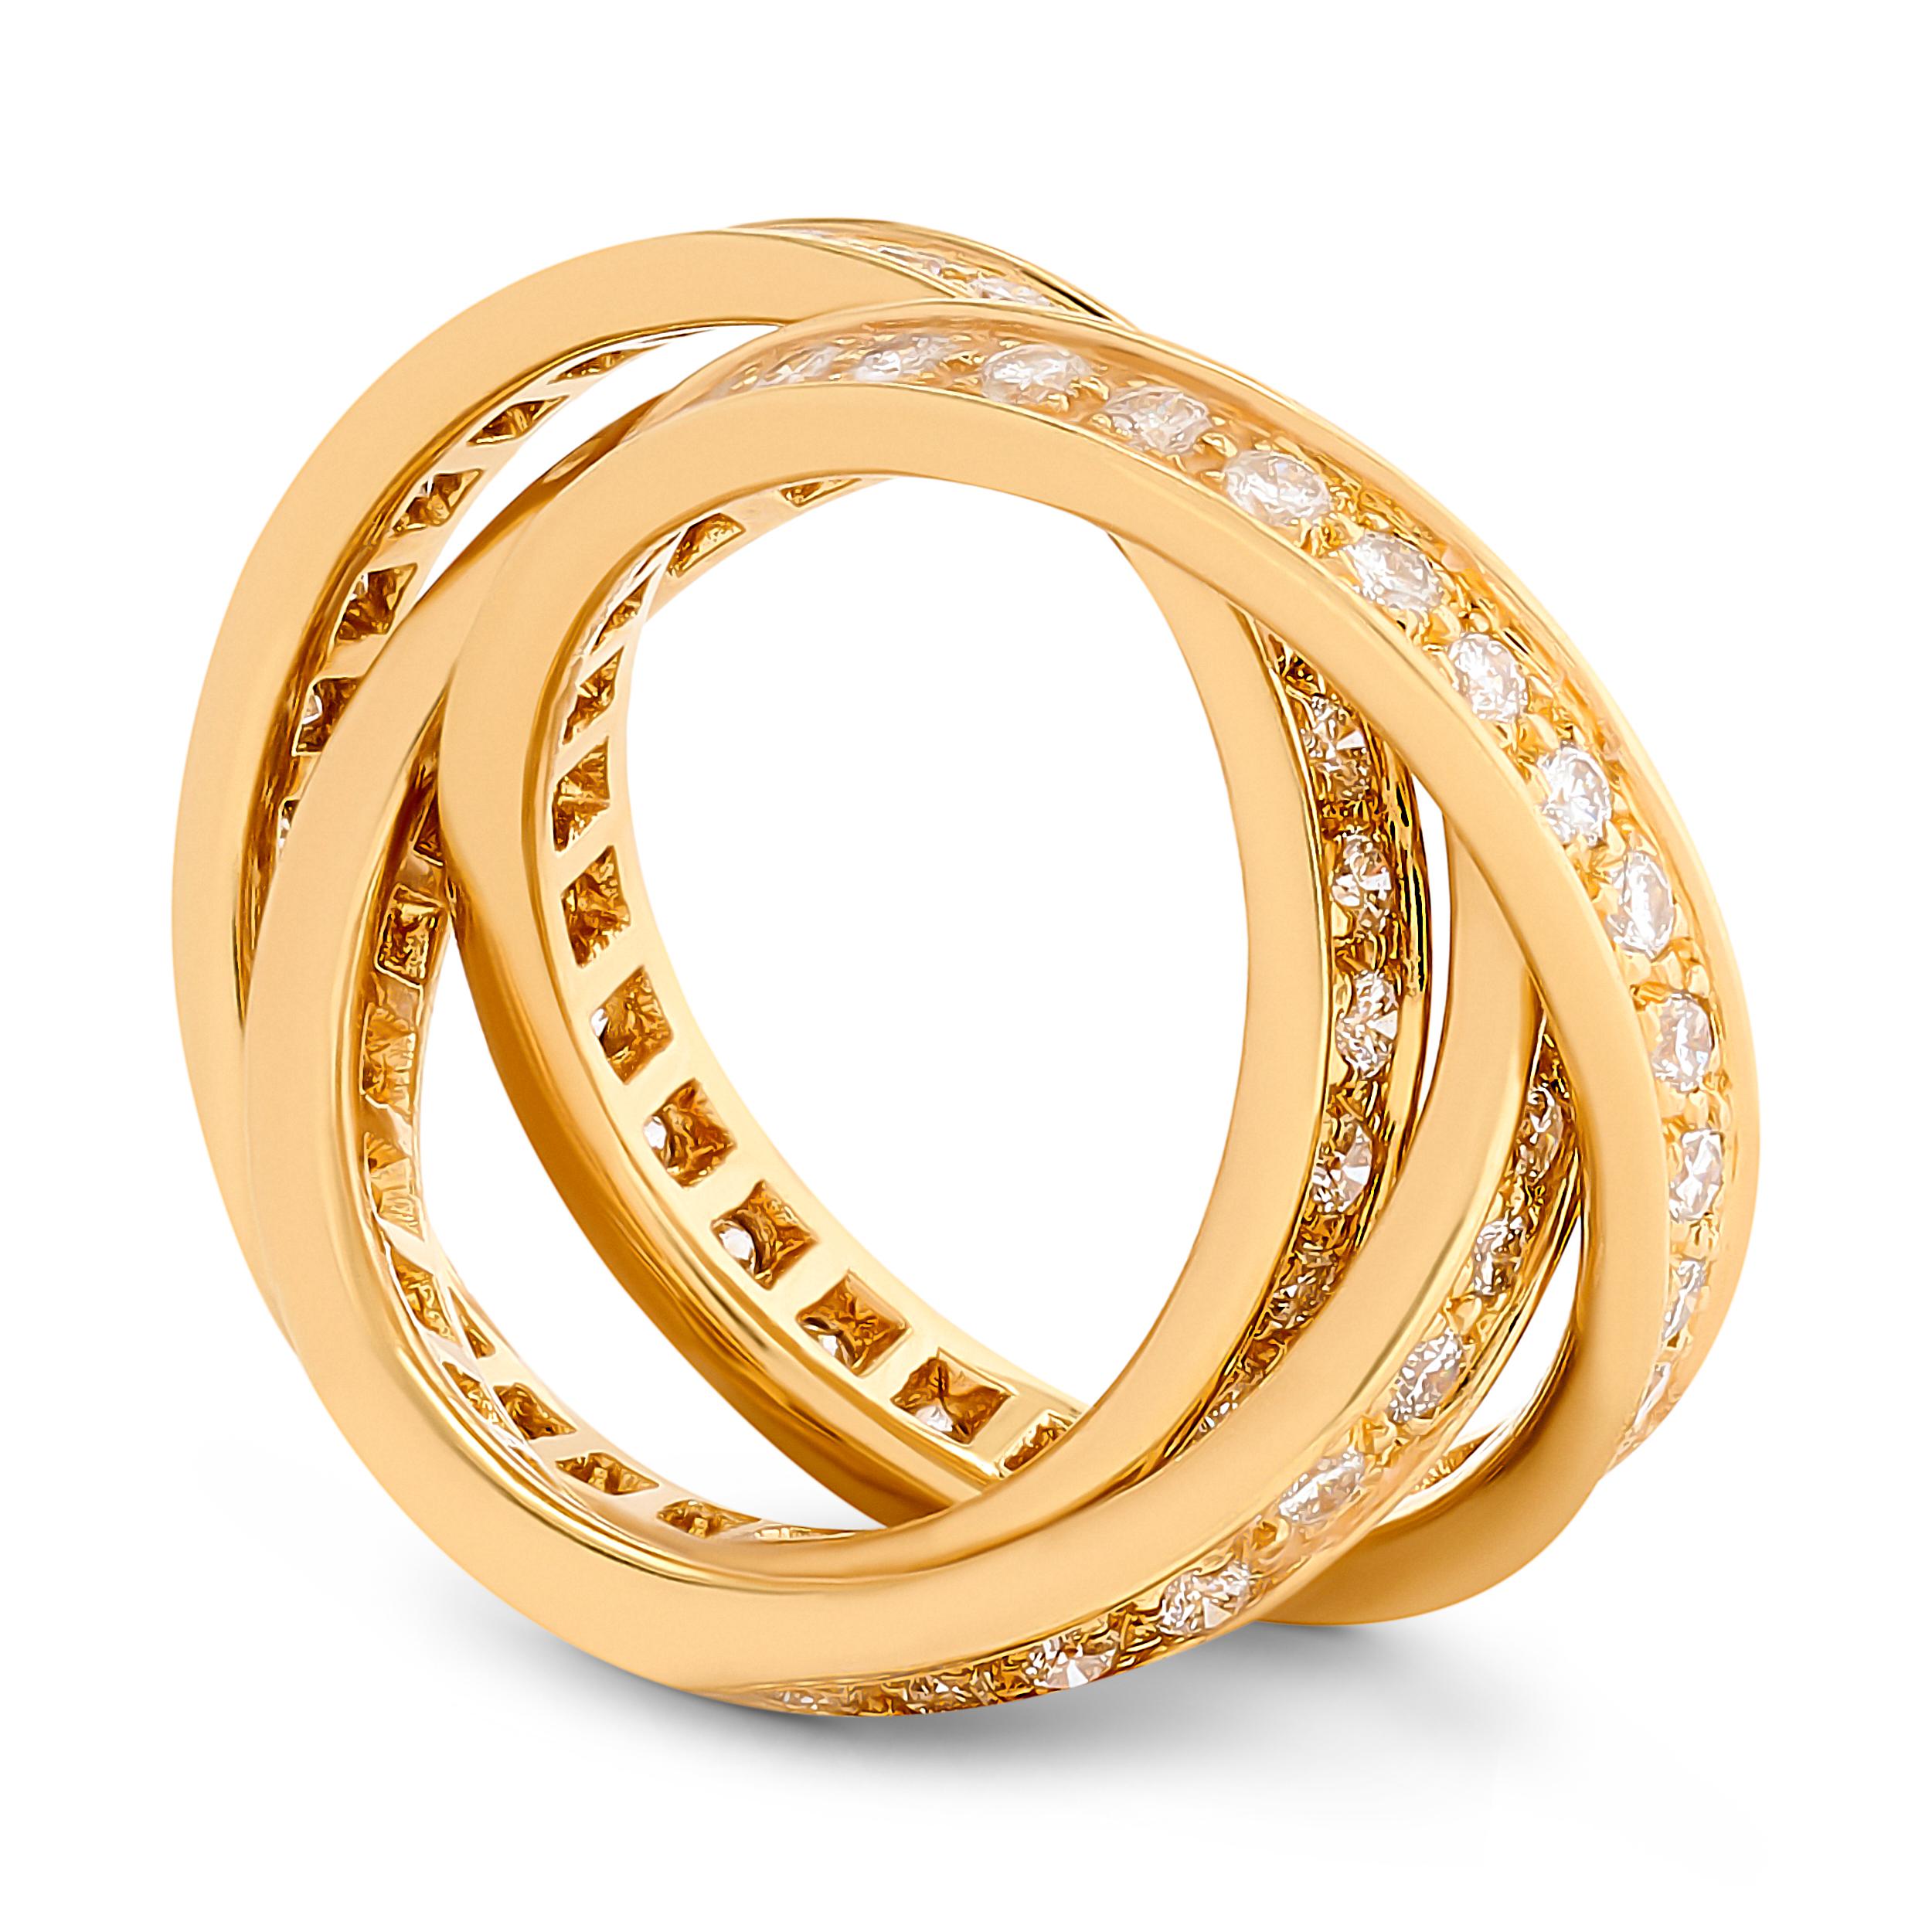 The 18K yellow gold Cartier diamond trinity ring has a harmonious dance of diamonds and gold that captures elegance in every rolling turn.

This Cartier ring features 3 interlocking bands set with approximately 1.55 carats of round brilliant cut